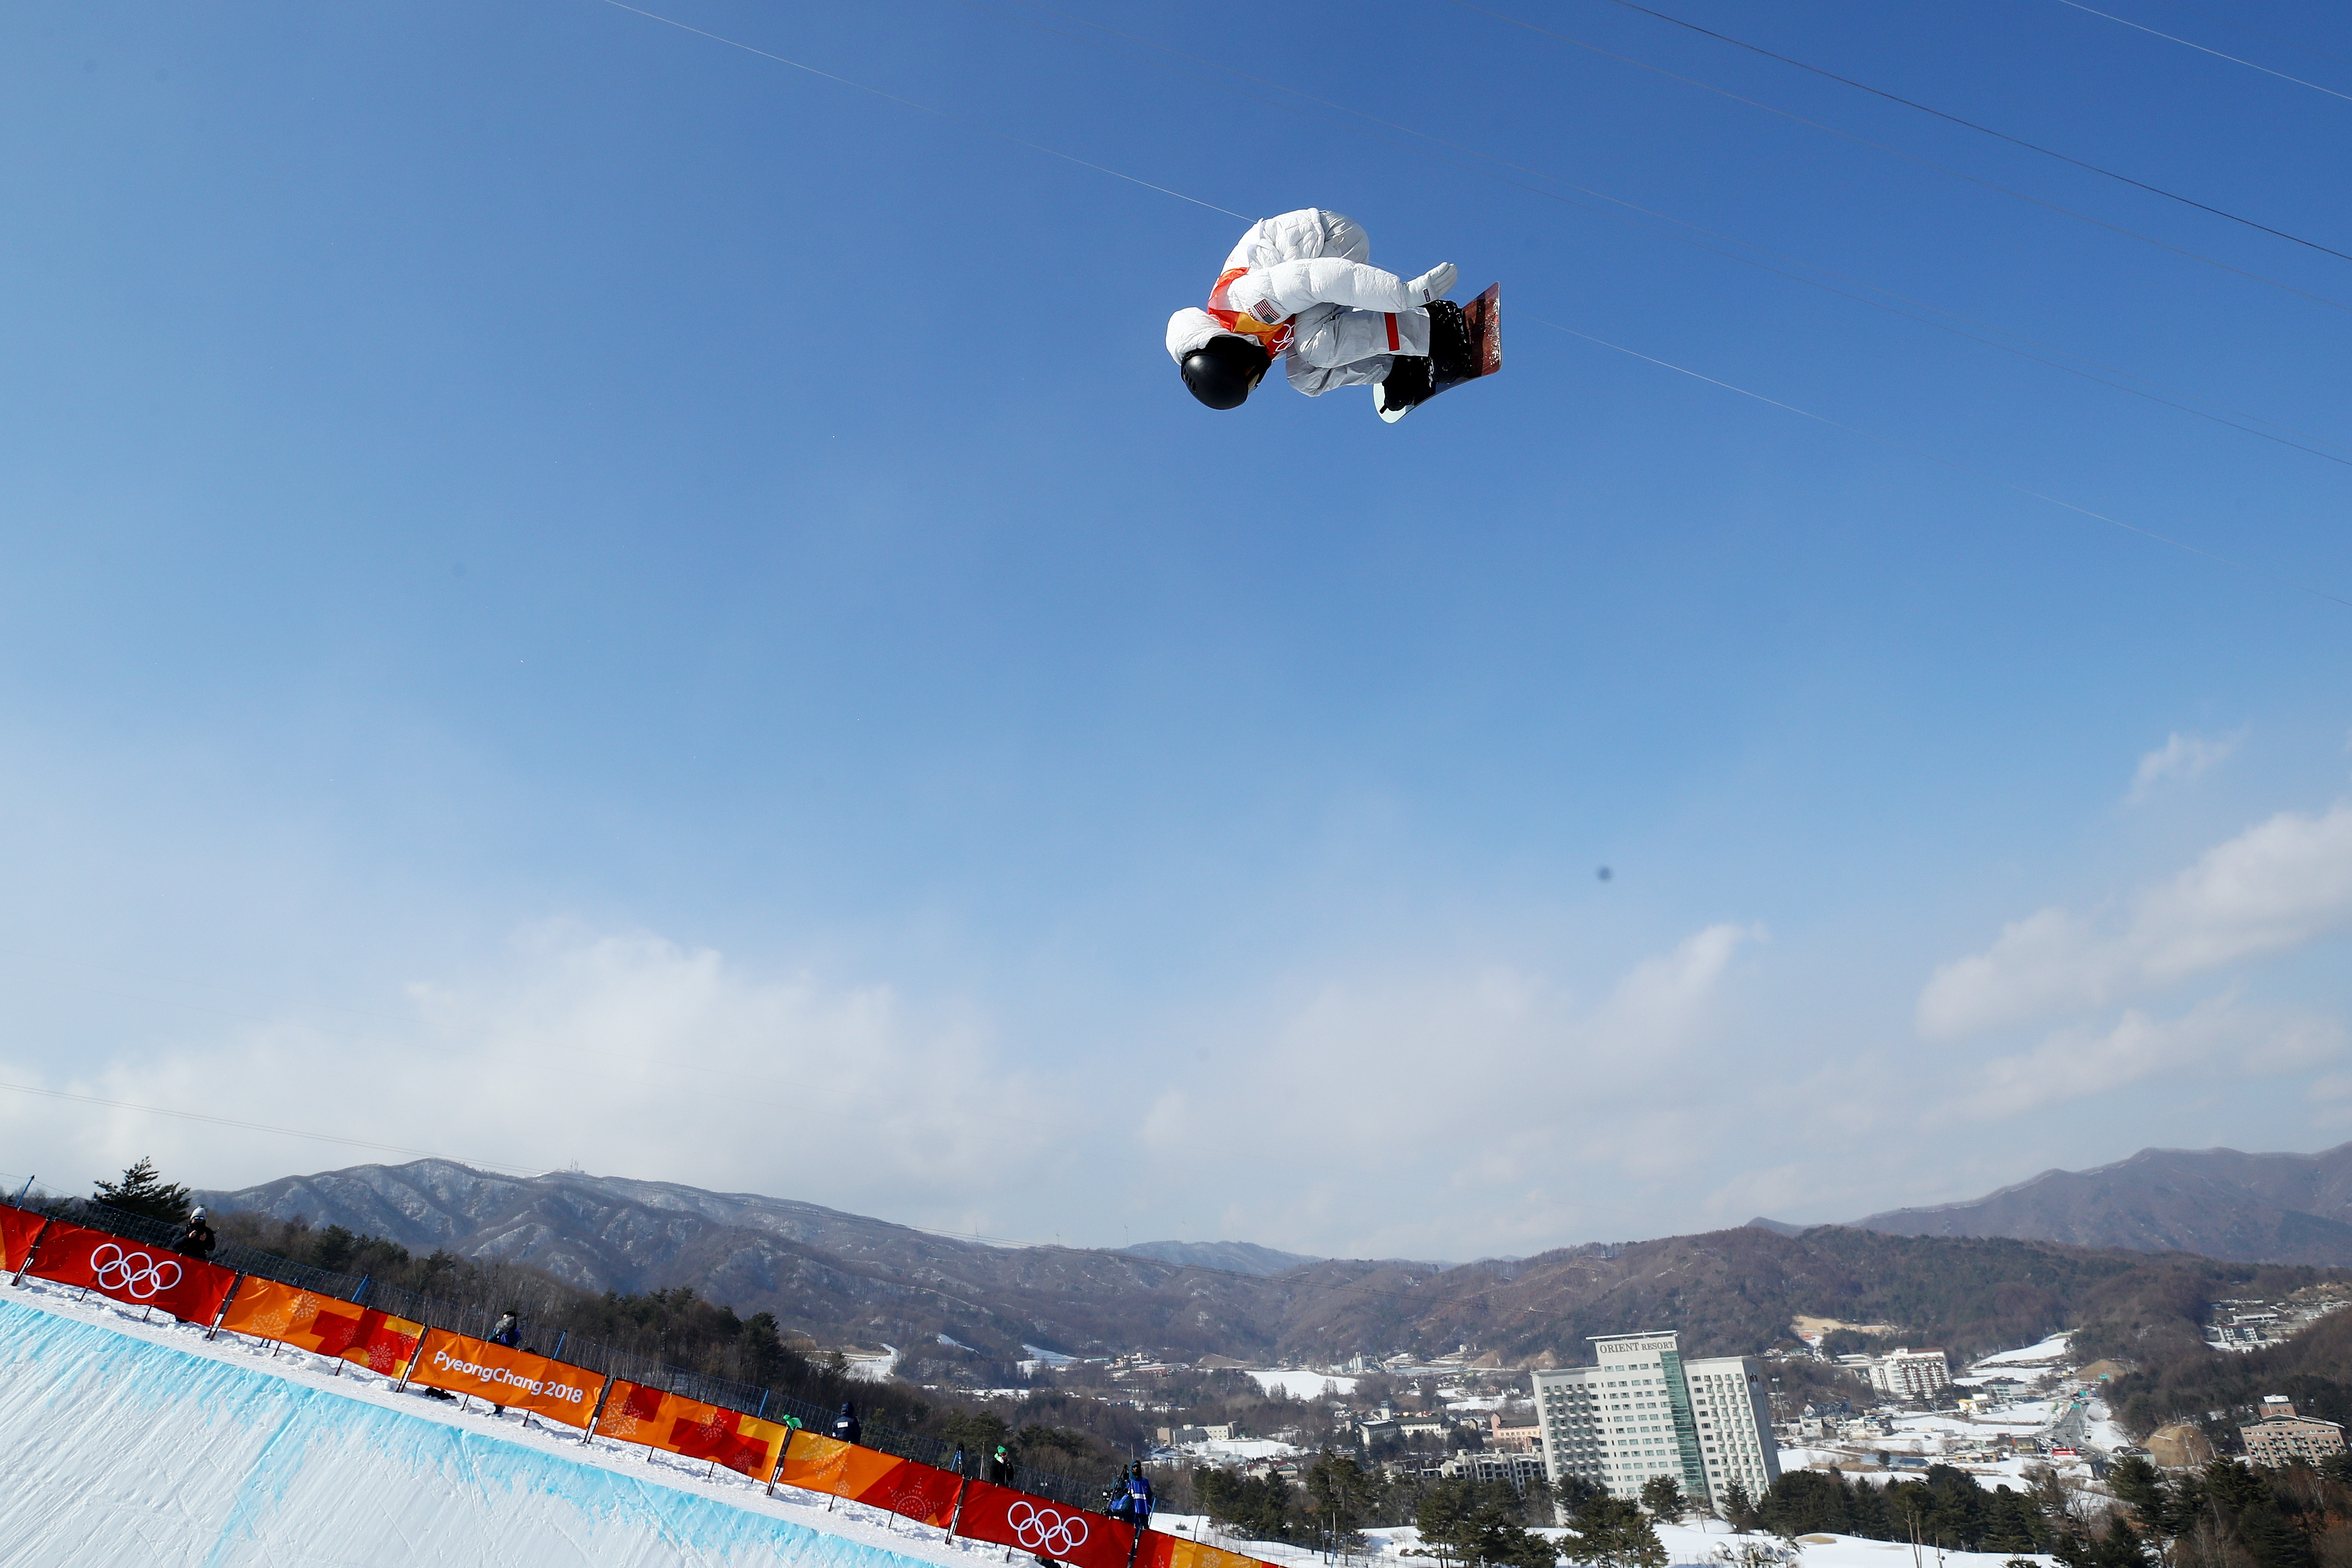 Shaun White competes during the Snowboard Men's Halfpipe Qualification on day four of the PyeongChang 2018 Winter Olympic Games in South Korea. Cameron Spencer—Getty Images (Cameron Spencer—Getty Images)